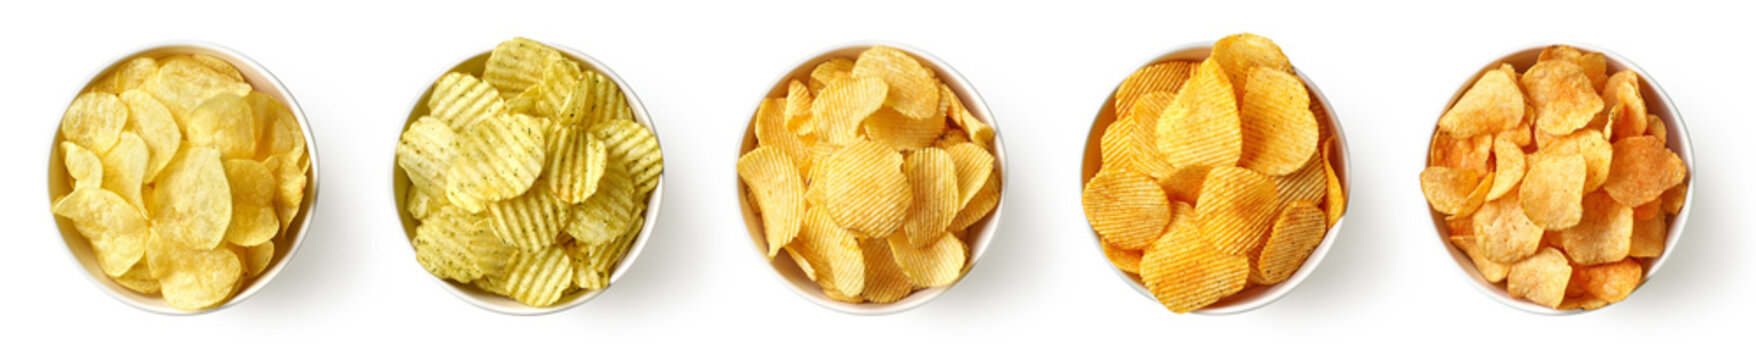 Set or collection of different flavor potato chips or crisps